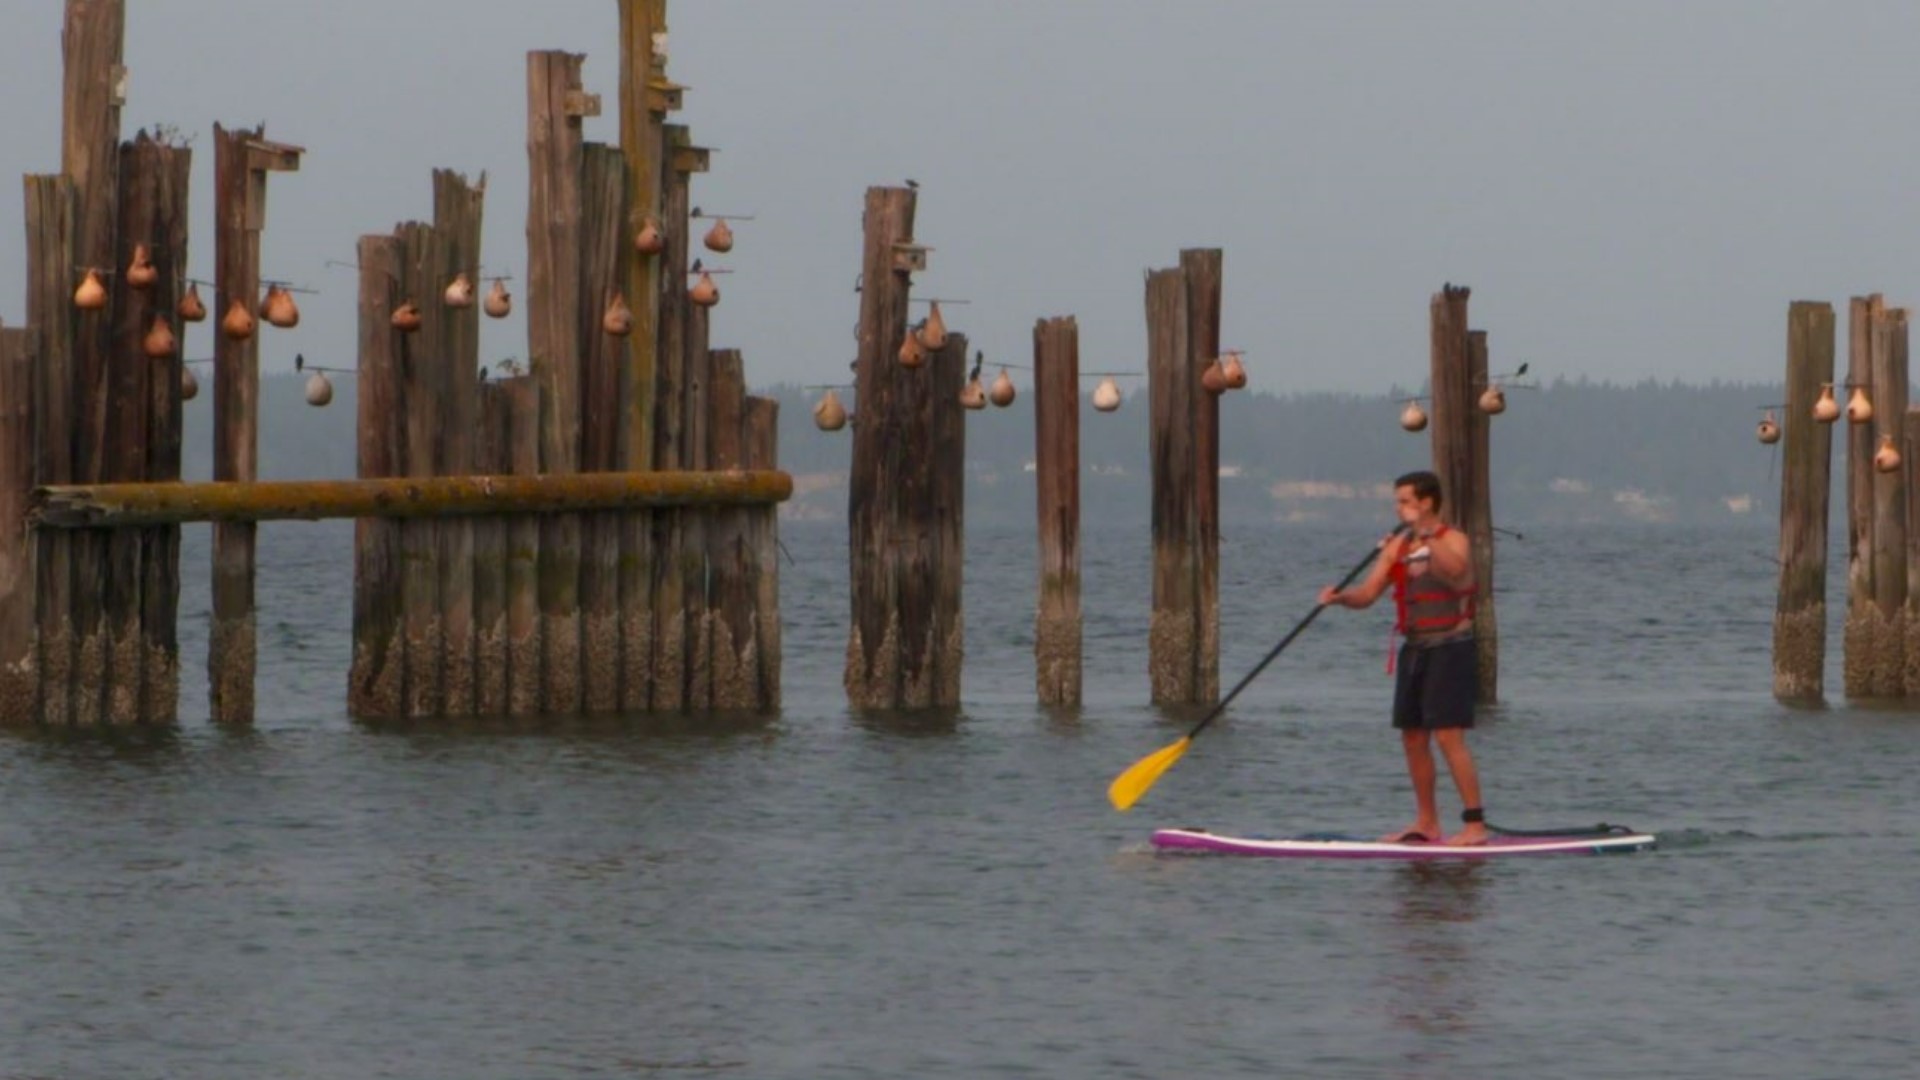 You can rent a paddleboard or kayak and buy a shaved ice at the family-owned shop near Golden Gardens Park in Seattle.